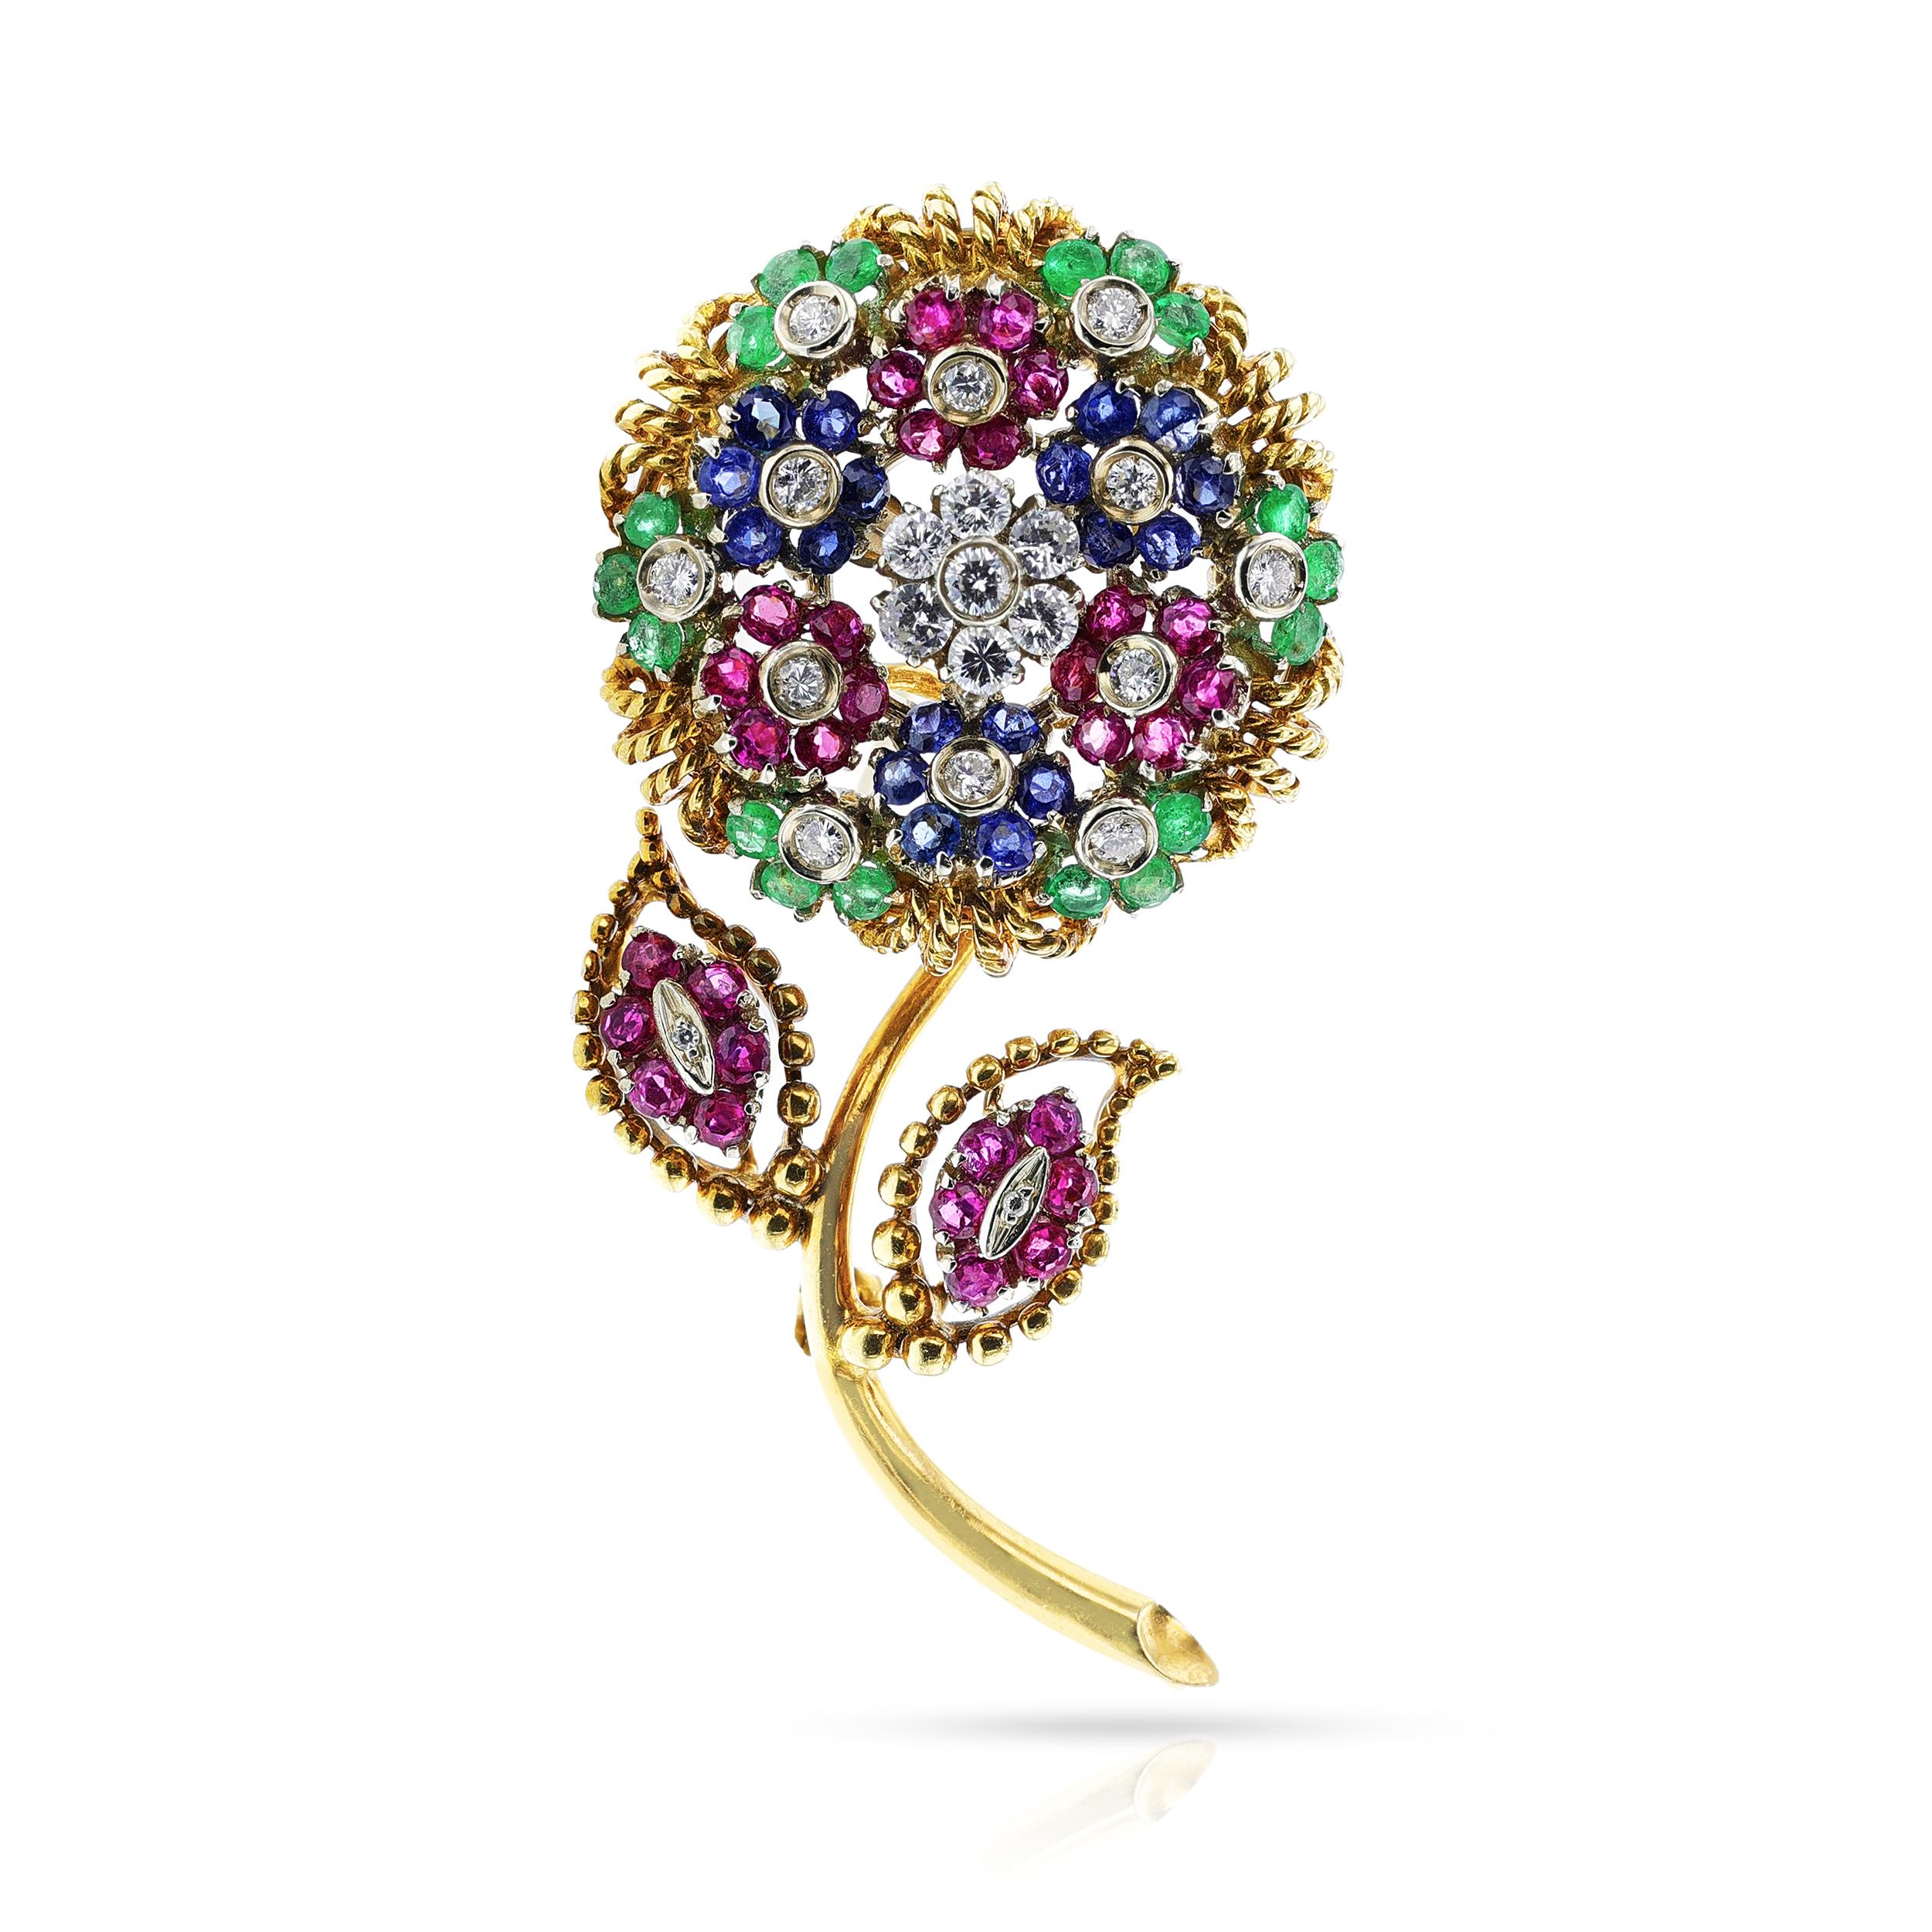 A Ruby, Emerald, Sapphire and Diamond Floral Brooch made in 18k Gold. The stones weigh approximately: 1.10 ct. Diamond, 1.60 ct. Sapphire, 1.44 ct. Emerald, Ruby: 2.7 cts. The brooch dimensions are 2.25